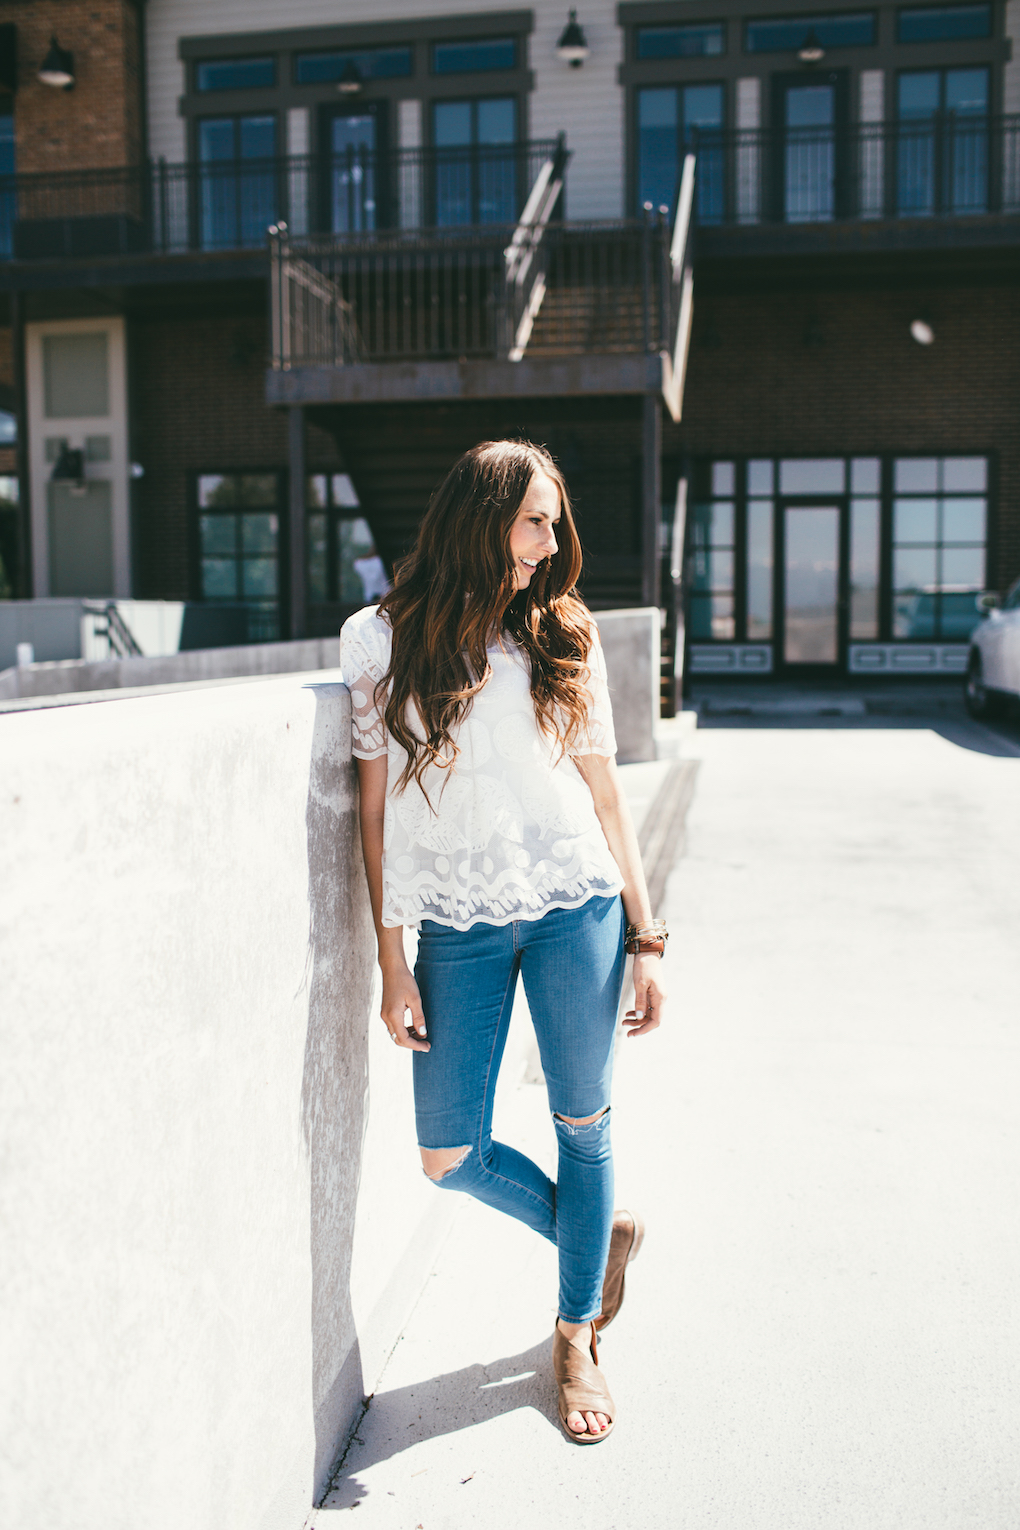 Girl standing in distressed denim jeans free people brown sandals and anthropologie white lemon lace top with long brown hair loosely curled